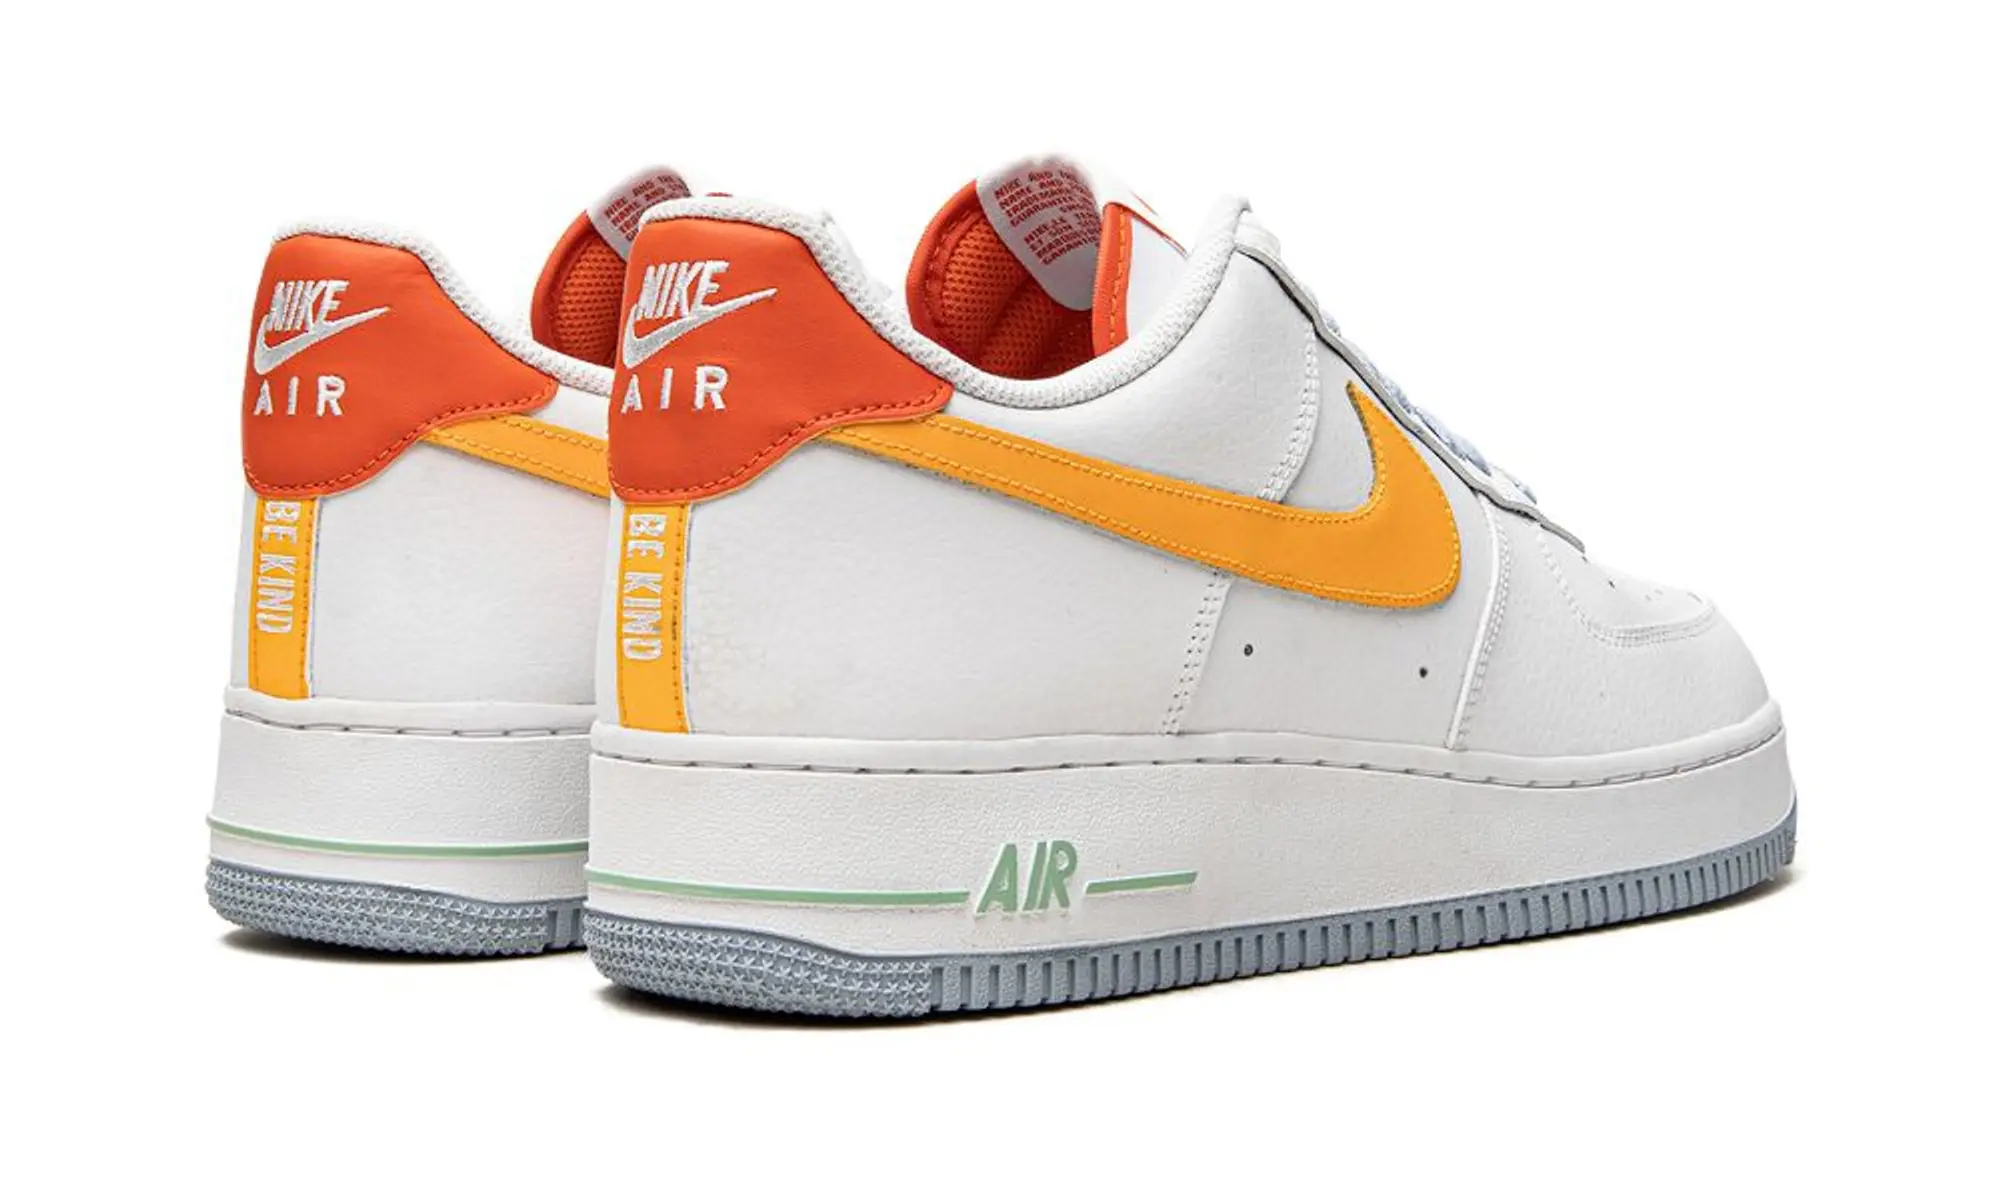 Nike Air Force 1 '07 LV8 Be Kind Shoes